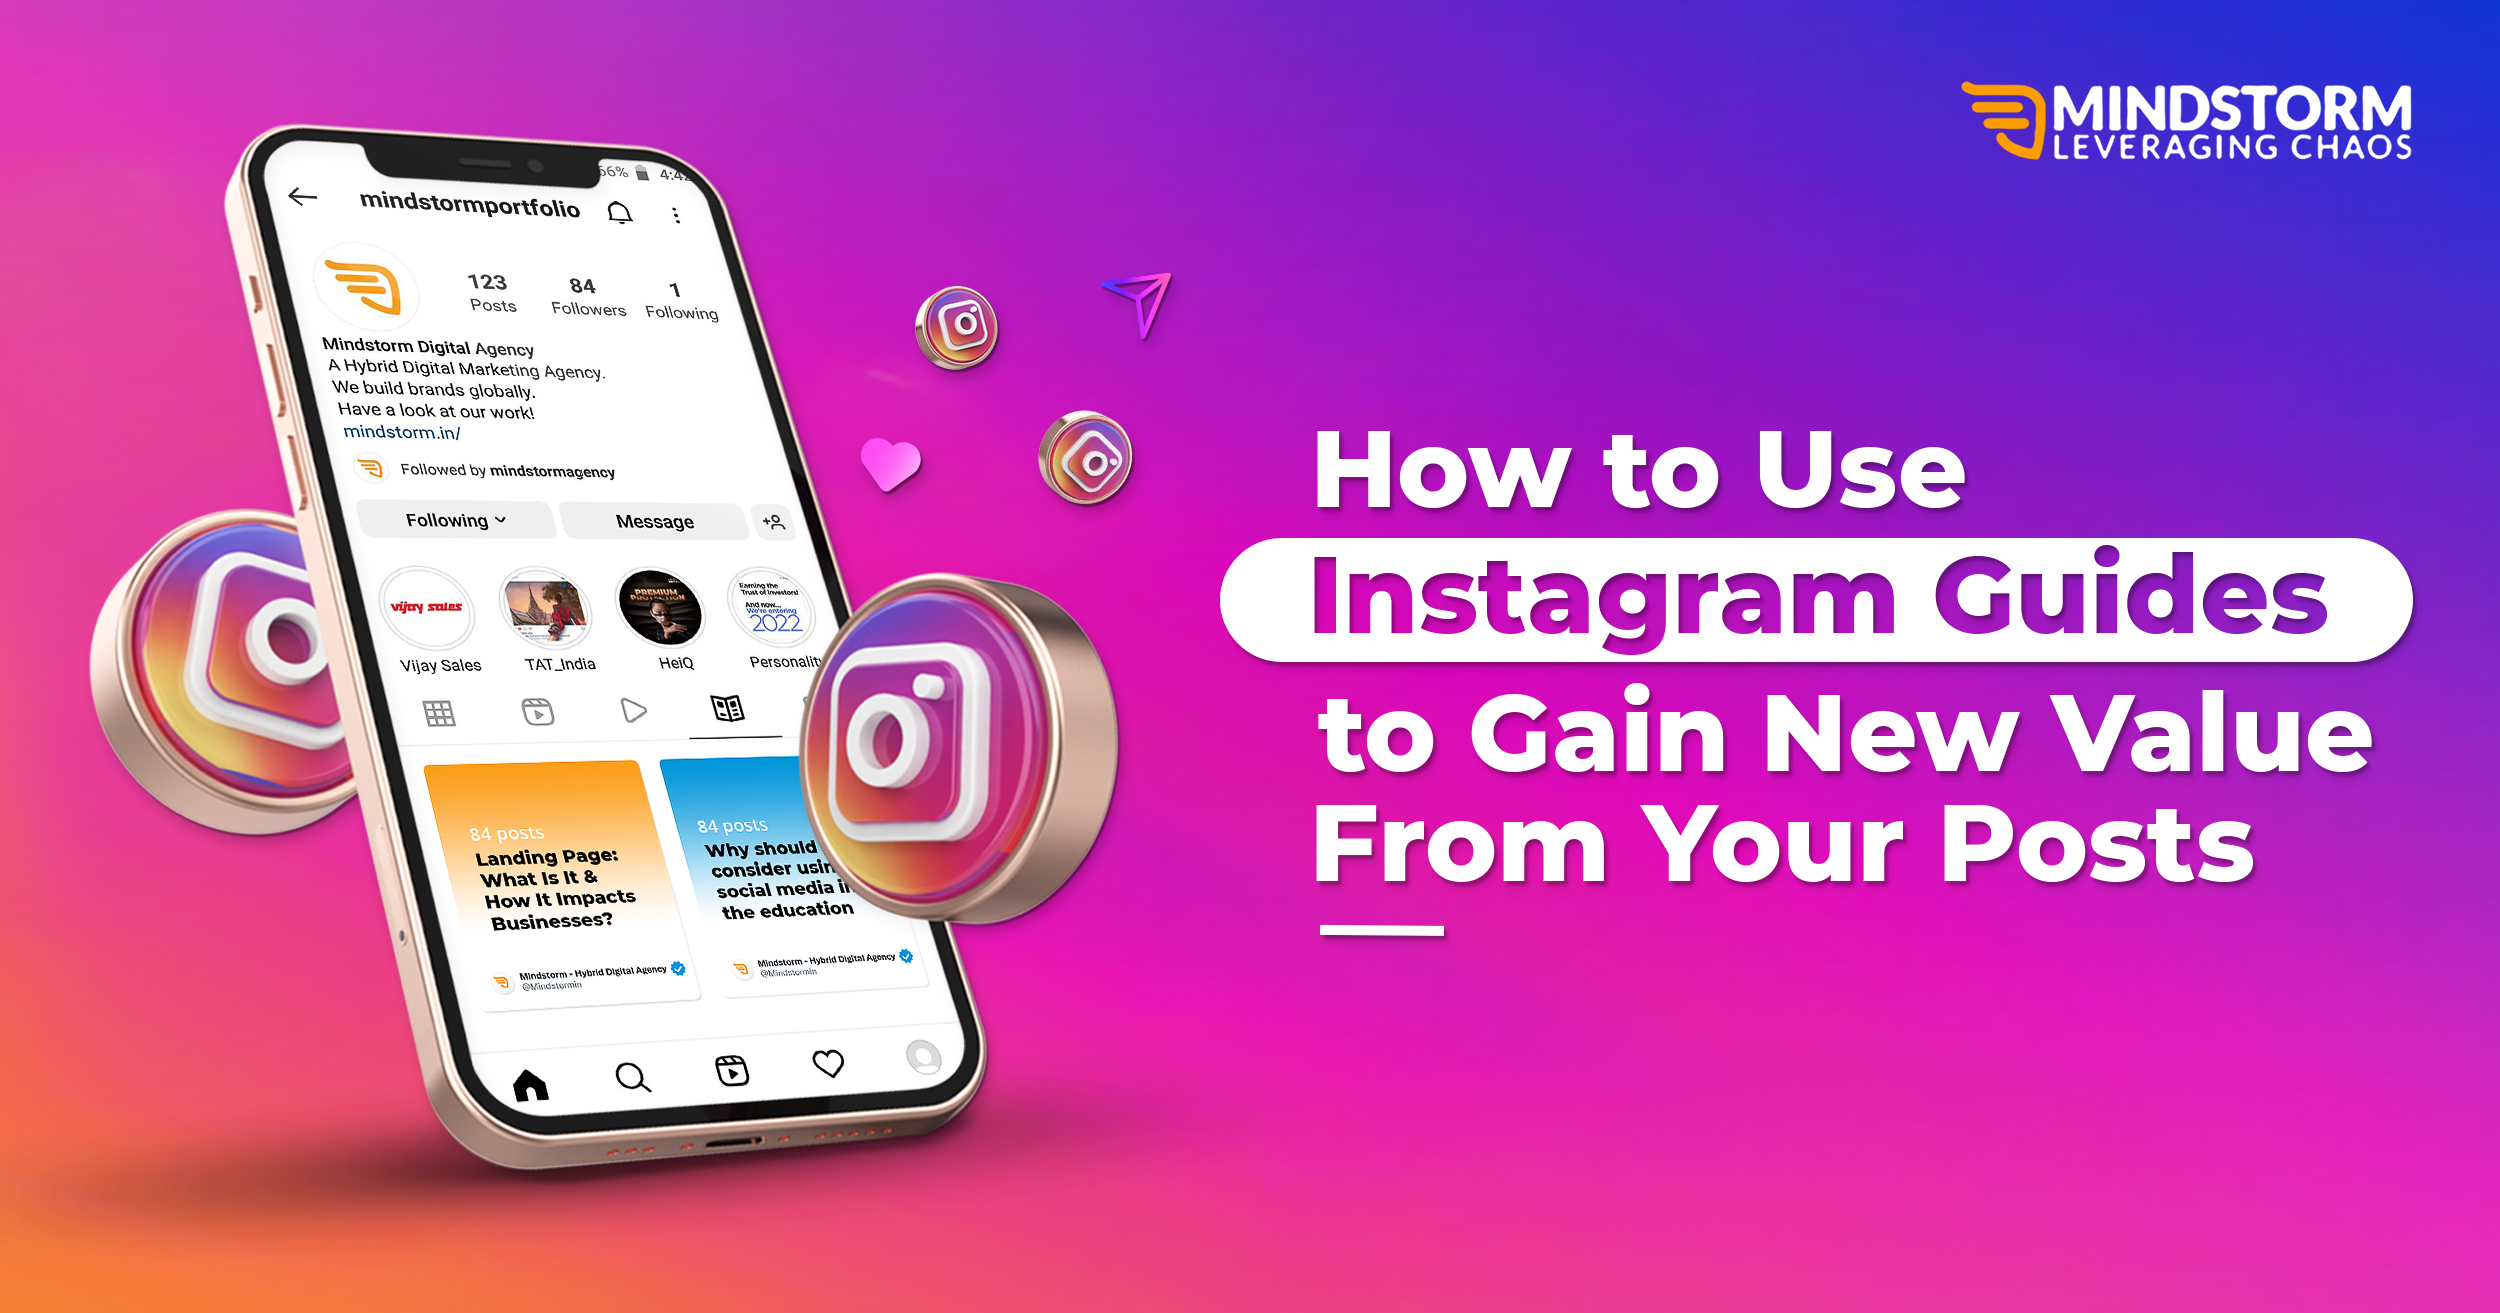 How to Use Instagram Guides to Gain New Value From Your Posts